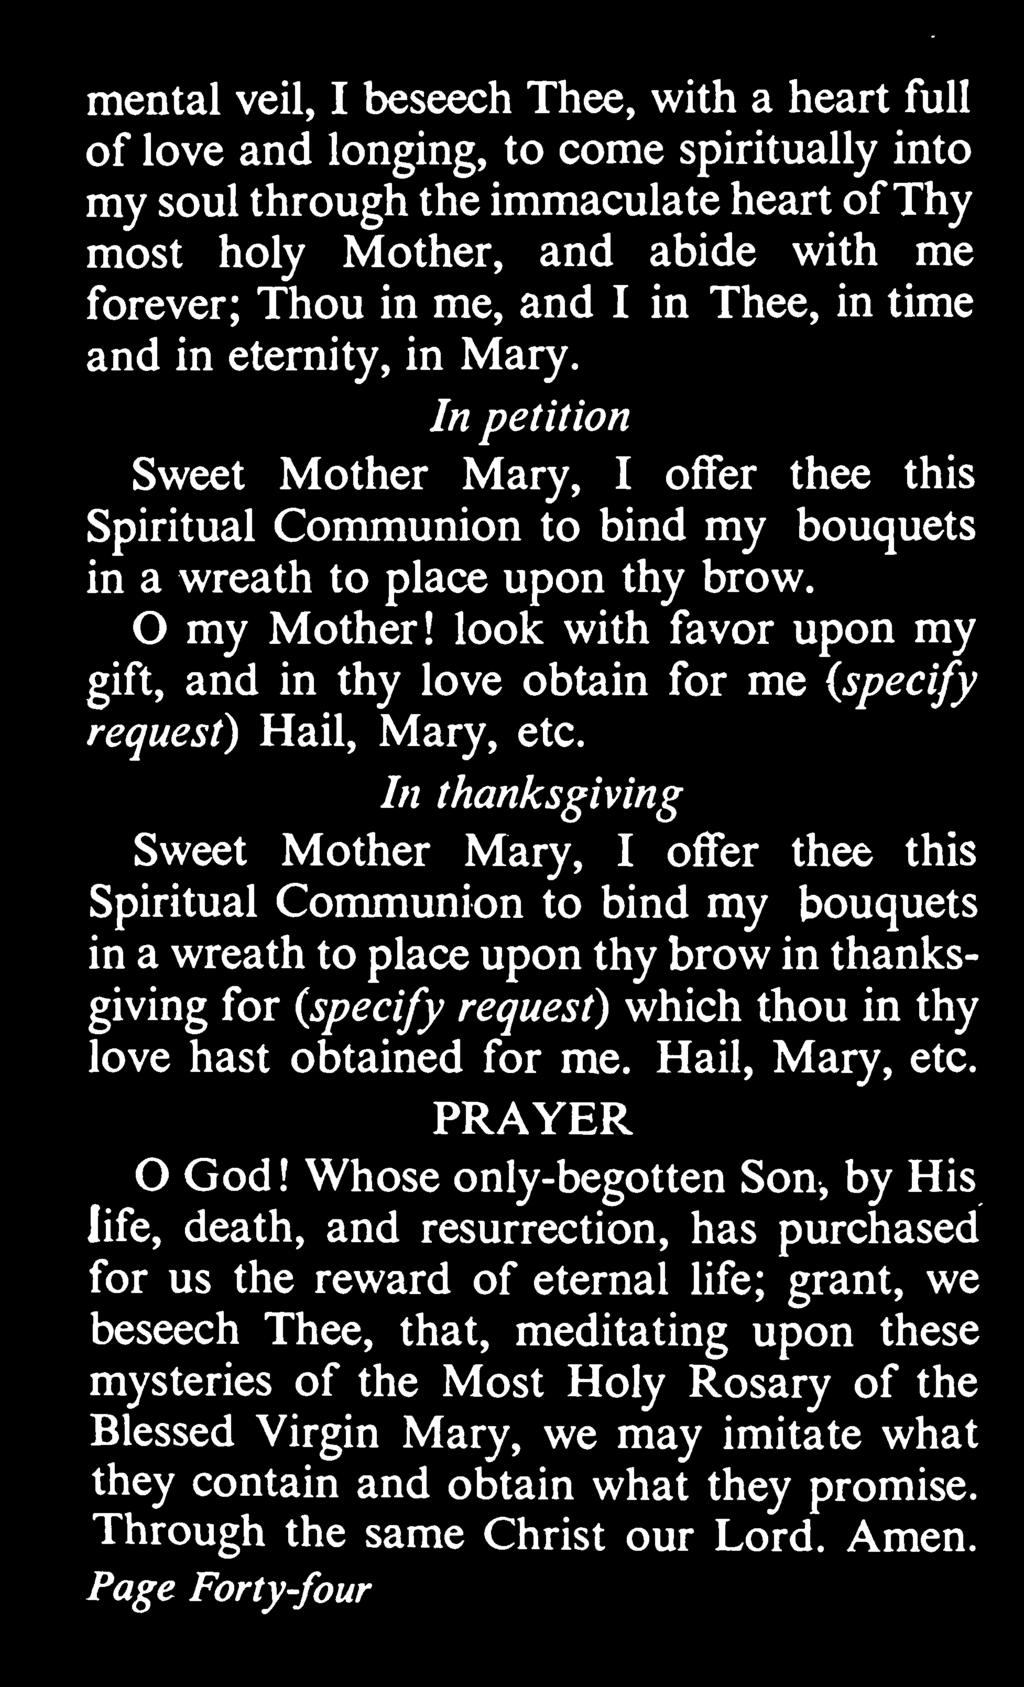 In thanksgiving Sweet Mother Mary, I offer thee this Spiritual Communion to bind my bouquets in a wreath to place upon thy brow in thanksgiving for {specify request) which thou